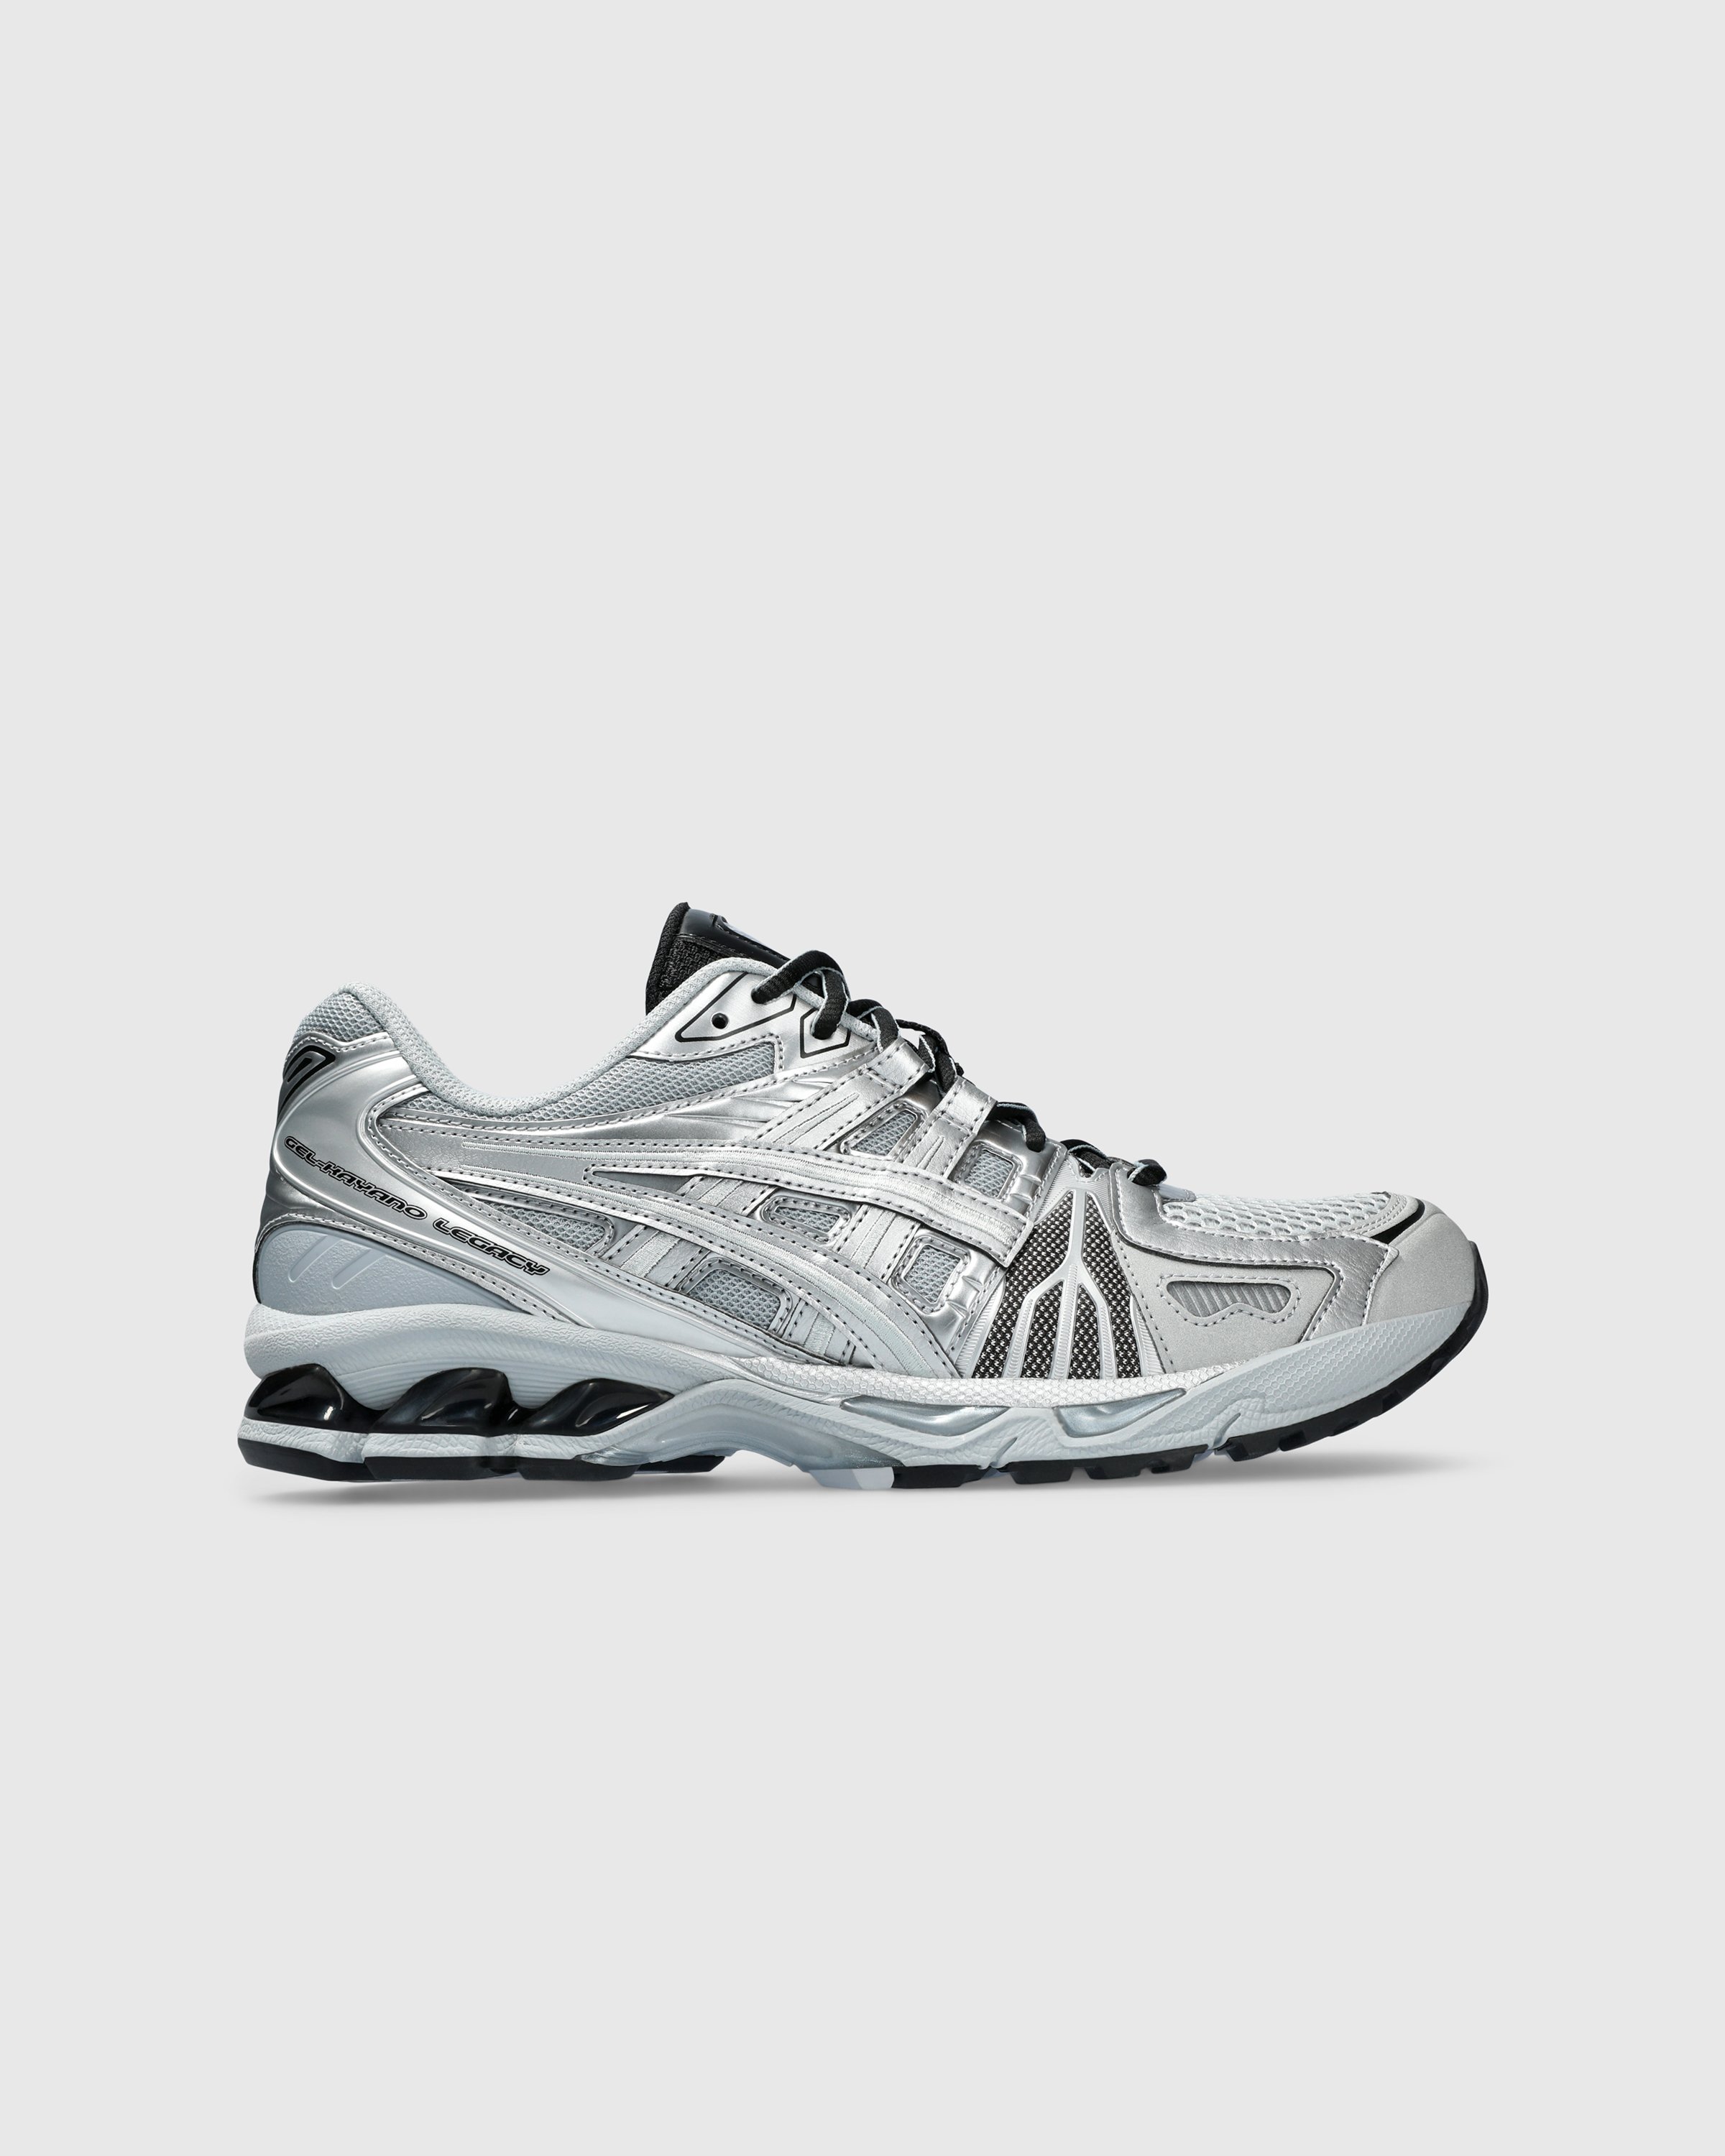 asics - GEL-KAYANO 14 Pure Silver/Pure Silver - Footwear - Silver - Image 1